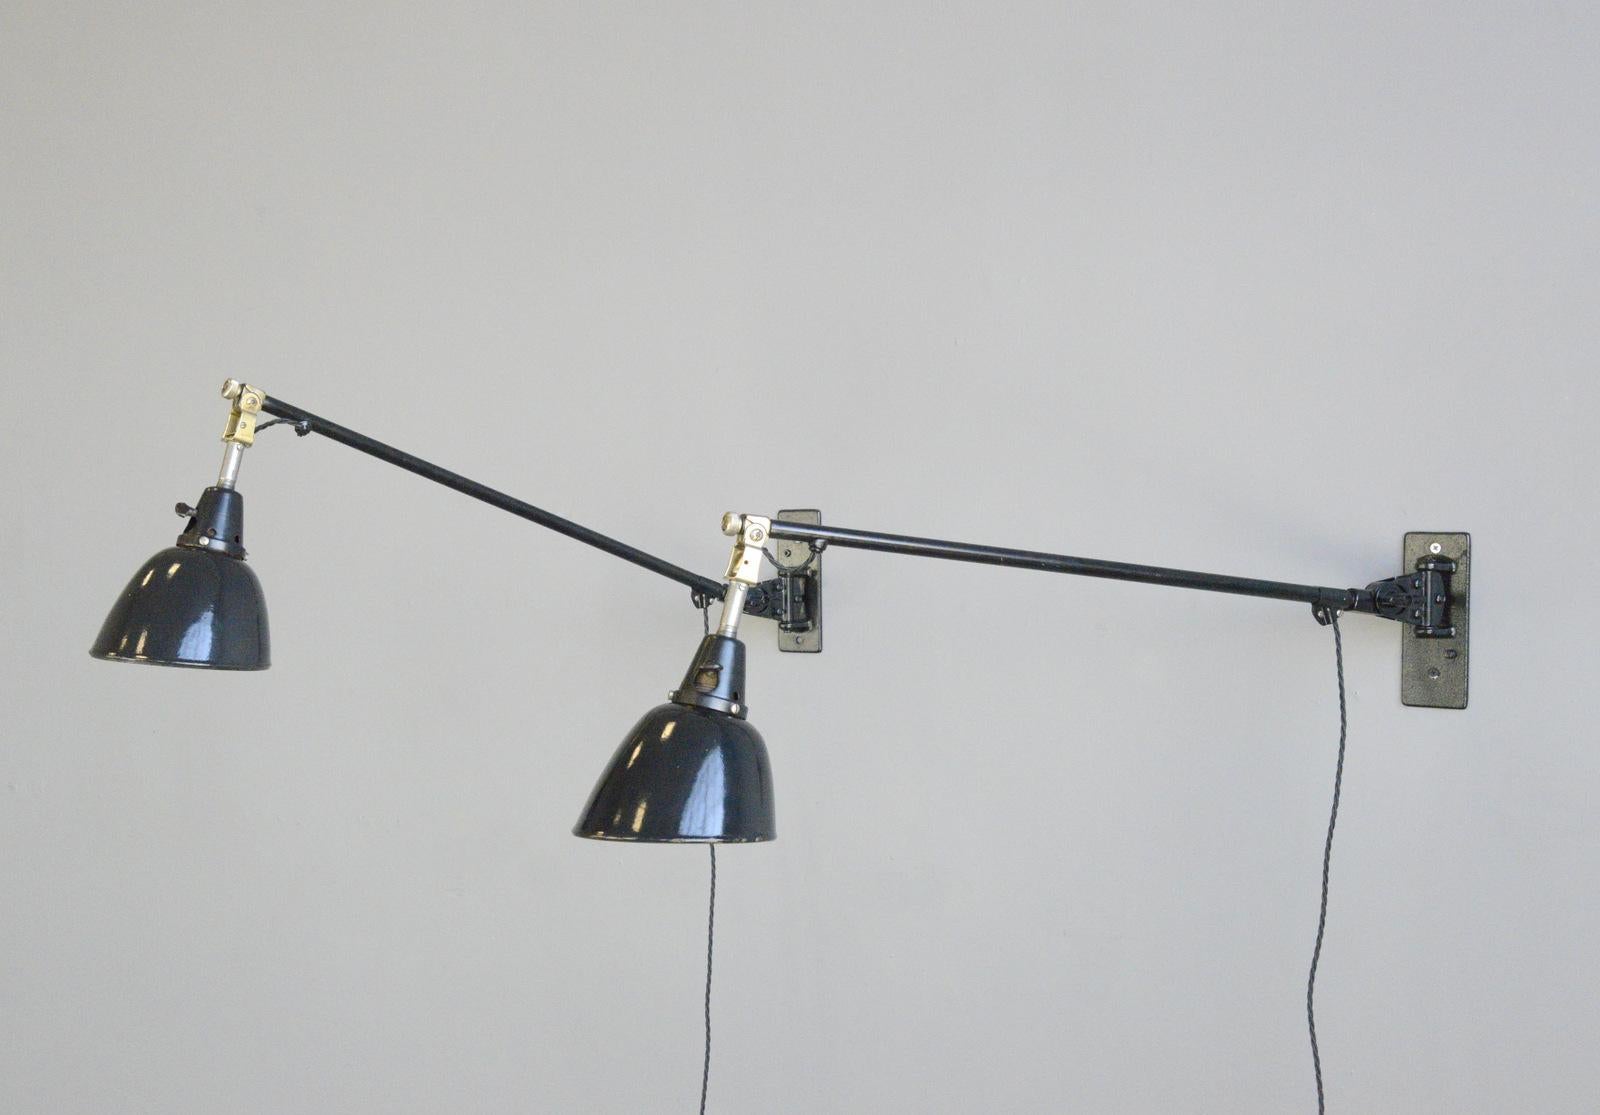 Wall-mounted task lamps by Midgard, circa 1930s

- Price is per lamp
- Black enamel shades
- Articulated steel arms
- On/Off toggle switches on the shades
- Brass detail on the joints
- Takes E27 fitting bulbs
- Designed by Curt Fischer
-